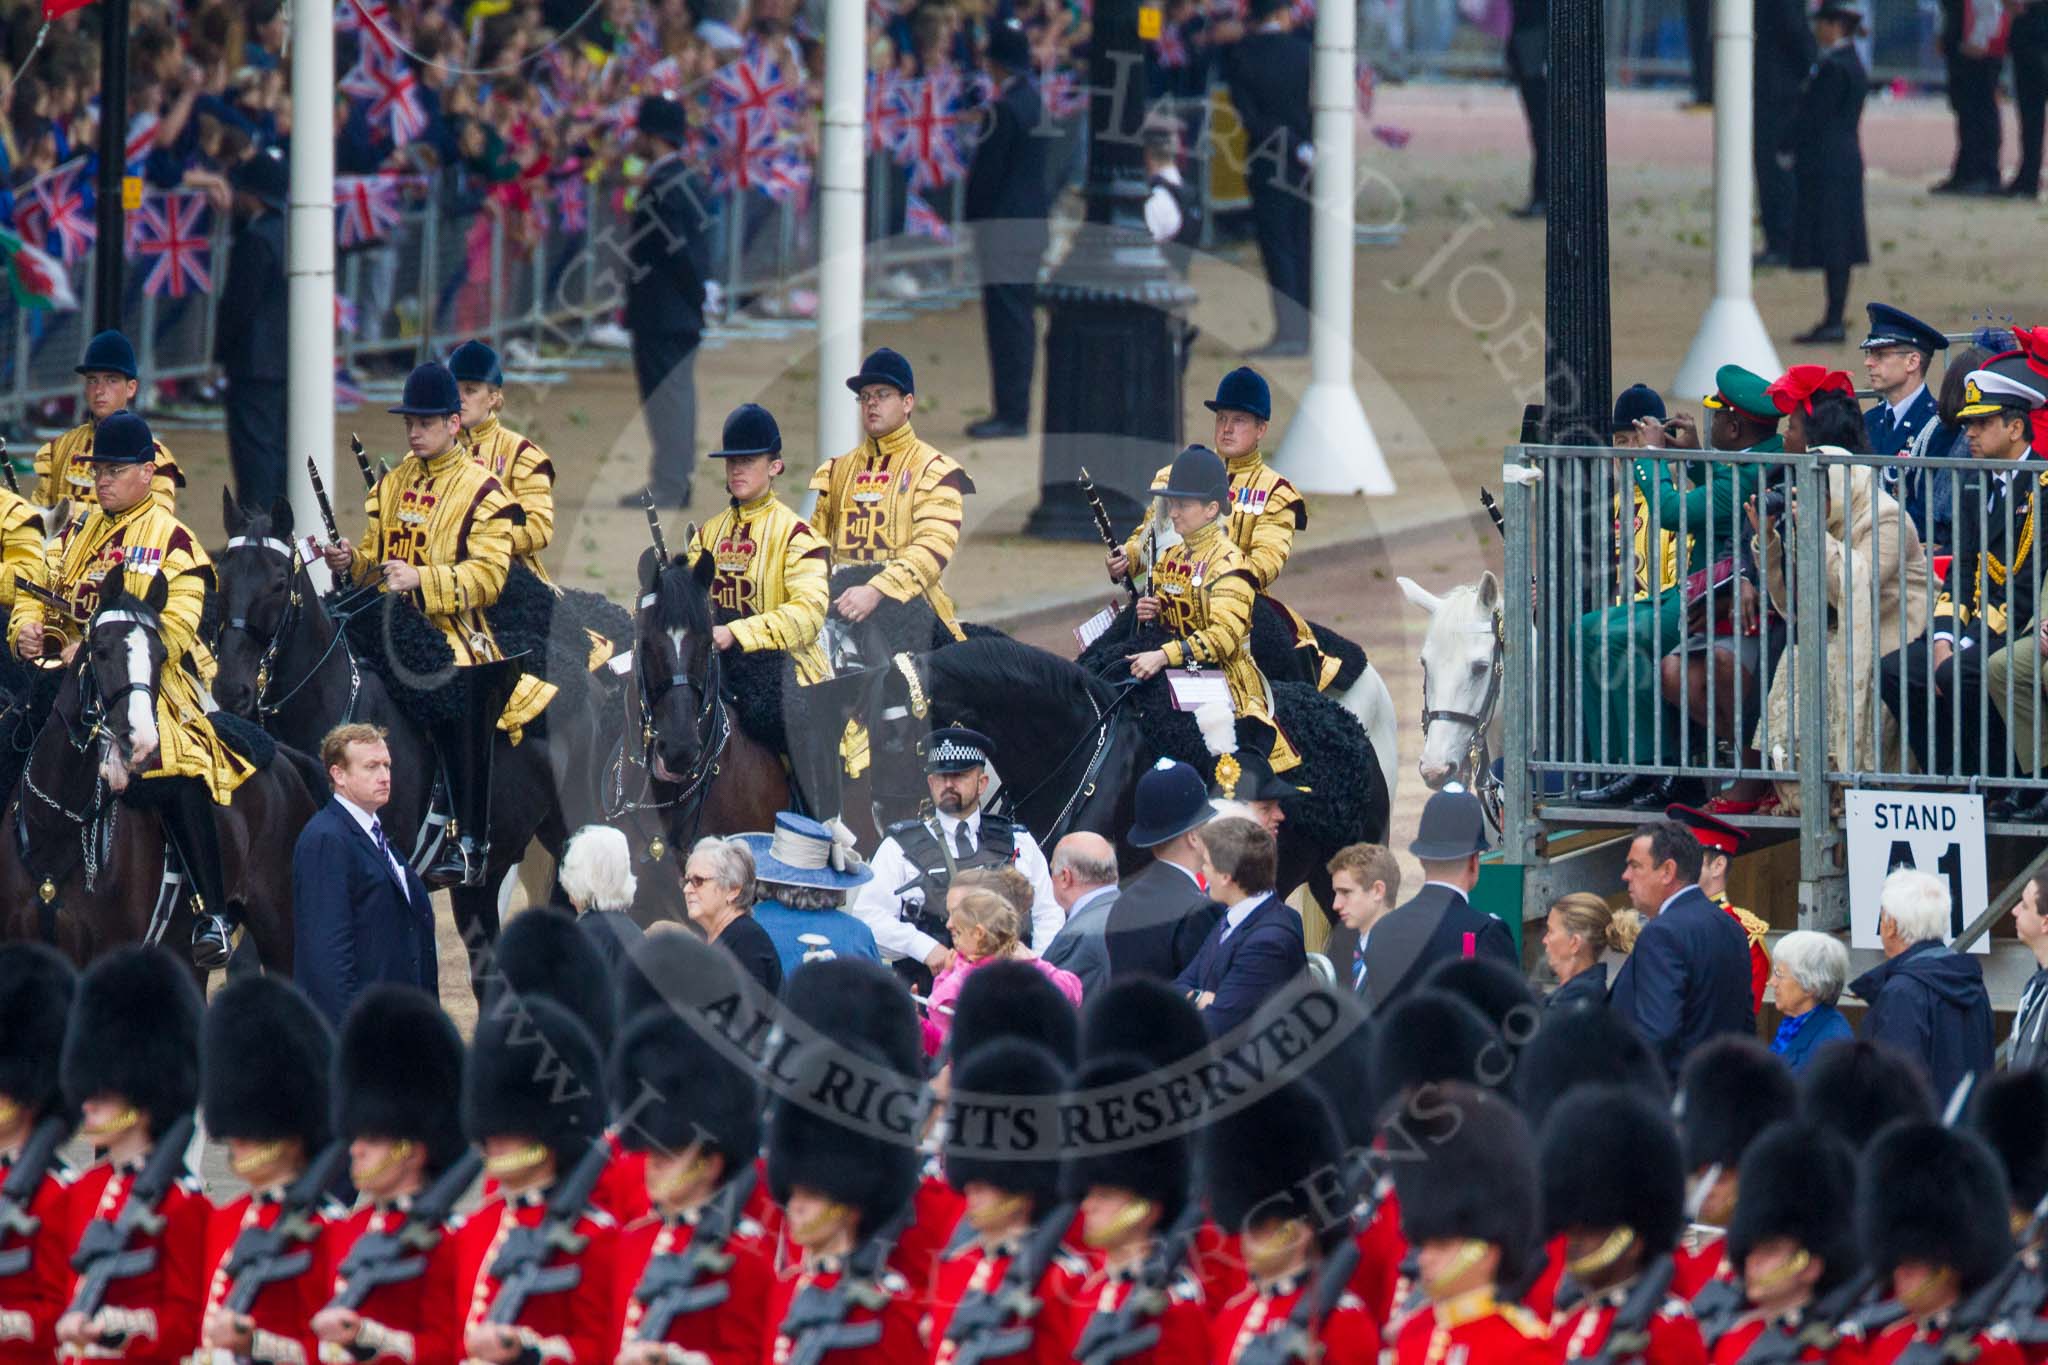 Trooping the Colour 2015. Image #217, 13 June 2015 10:56 Horse Guards Parade, London, UK